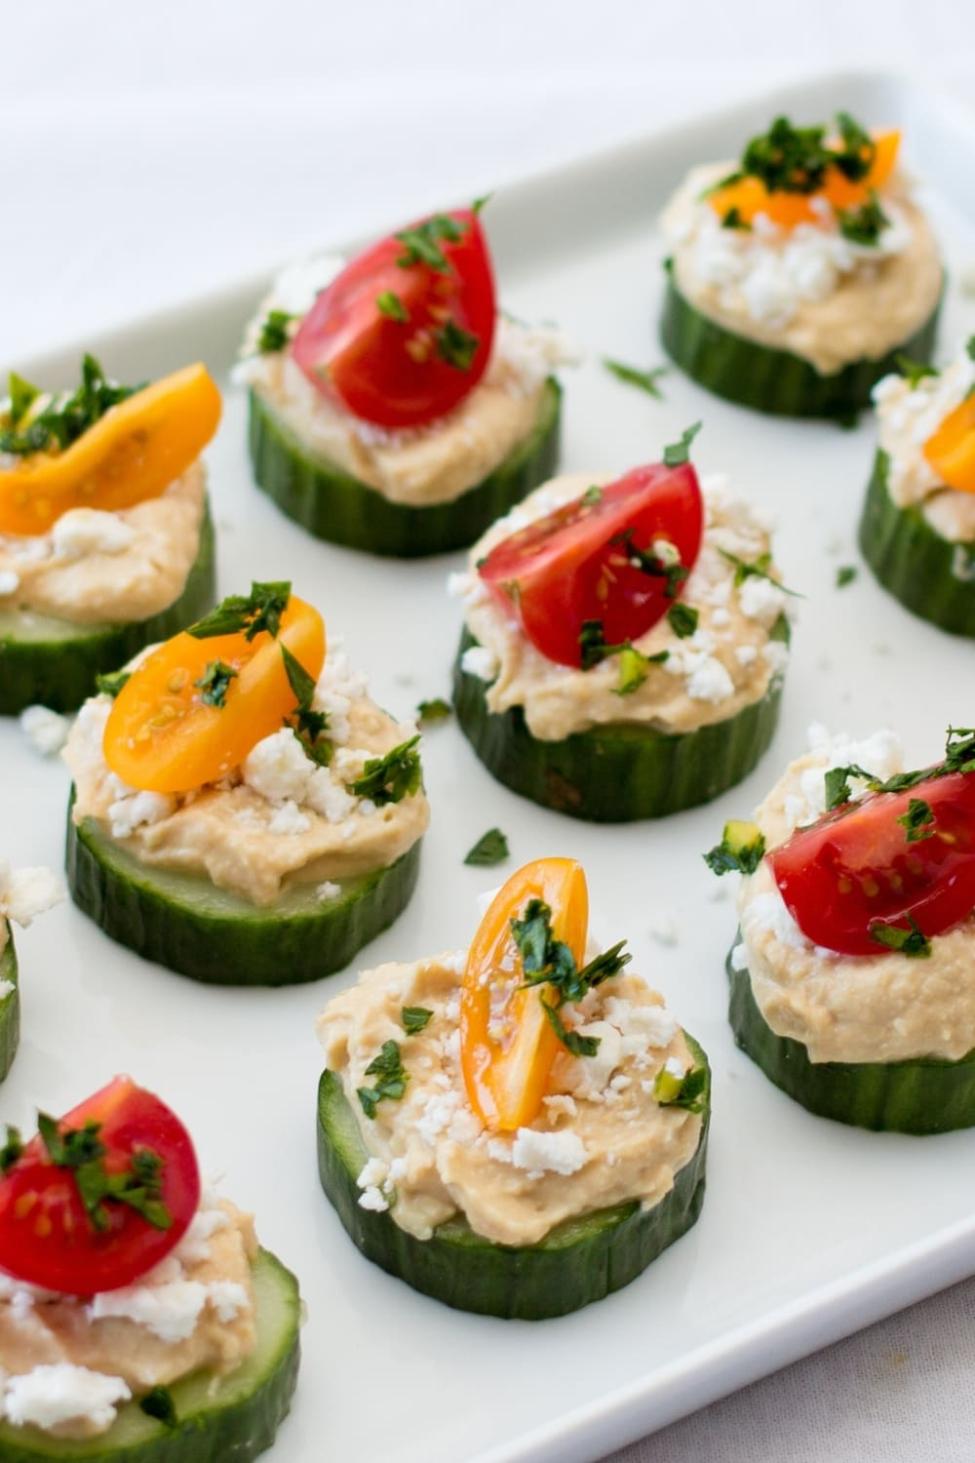 What Are Some Creative Ways to Serve Appetizers?